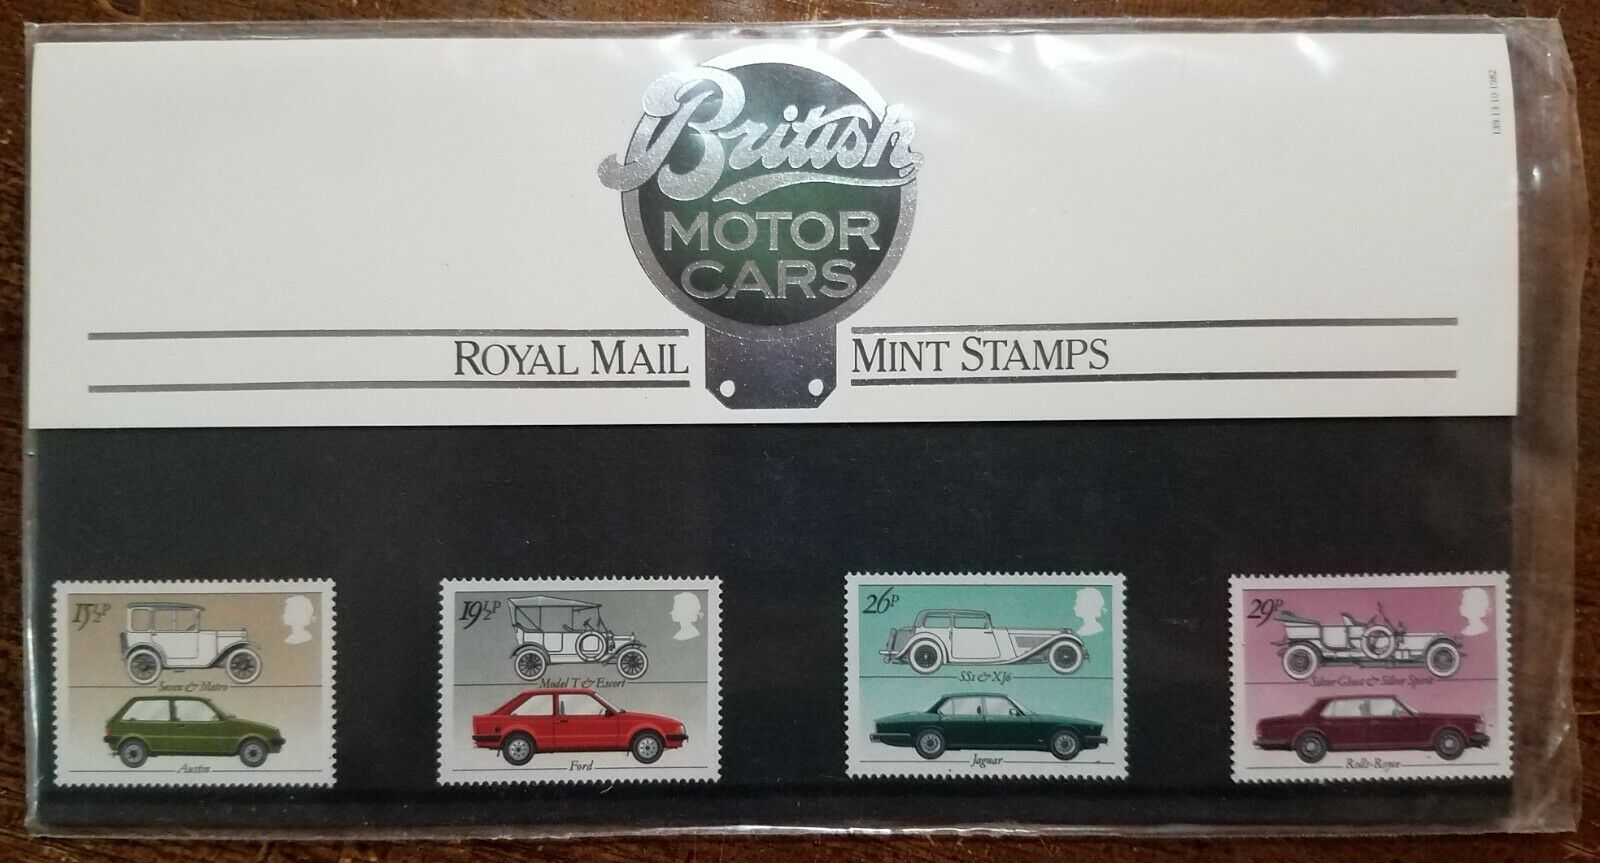 Royal Mail Mint Stamps - British Motor Cars